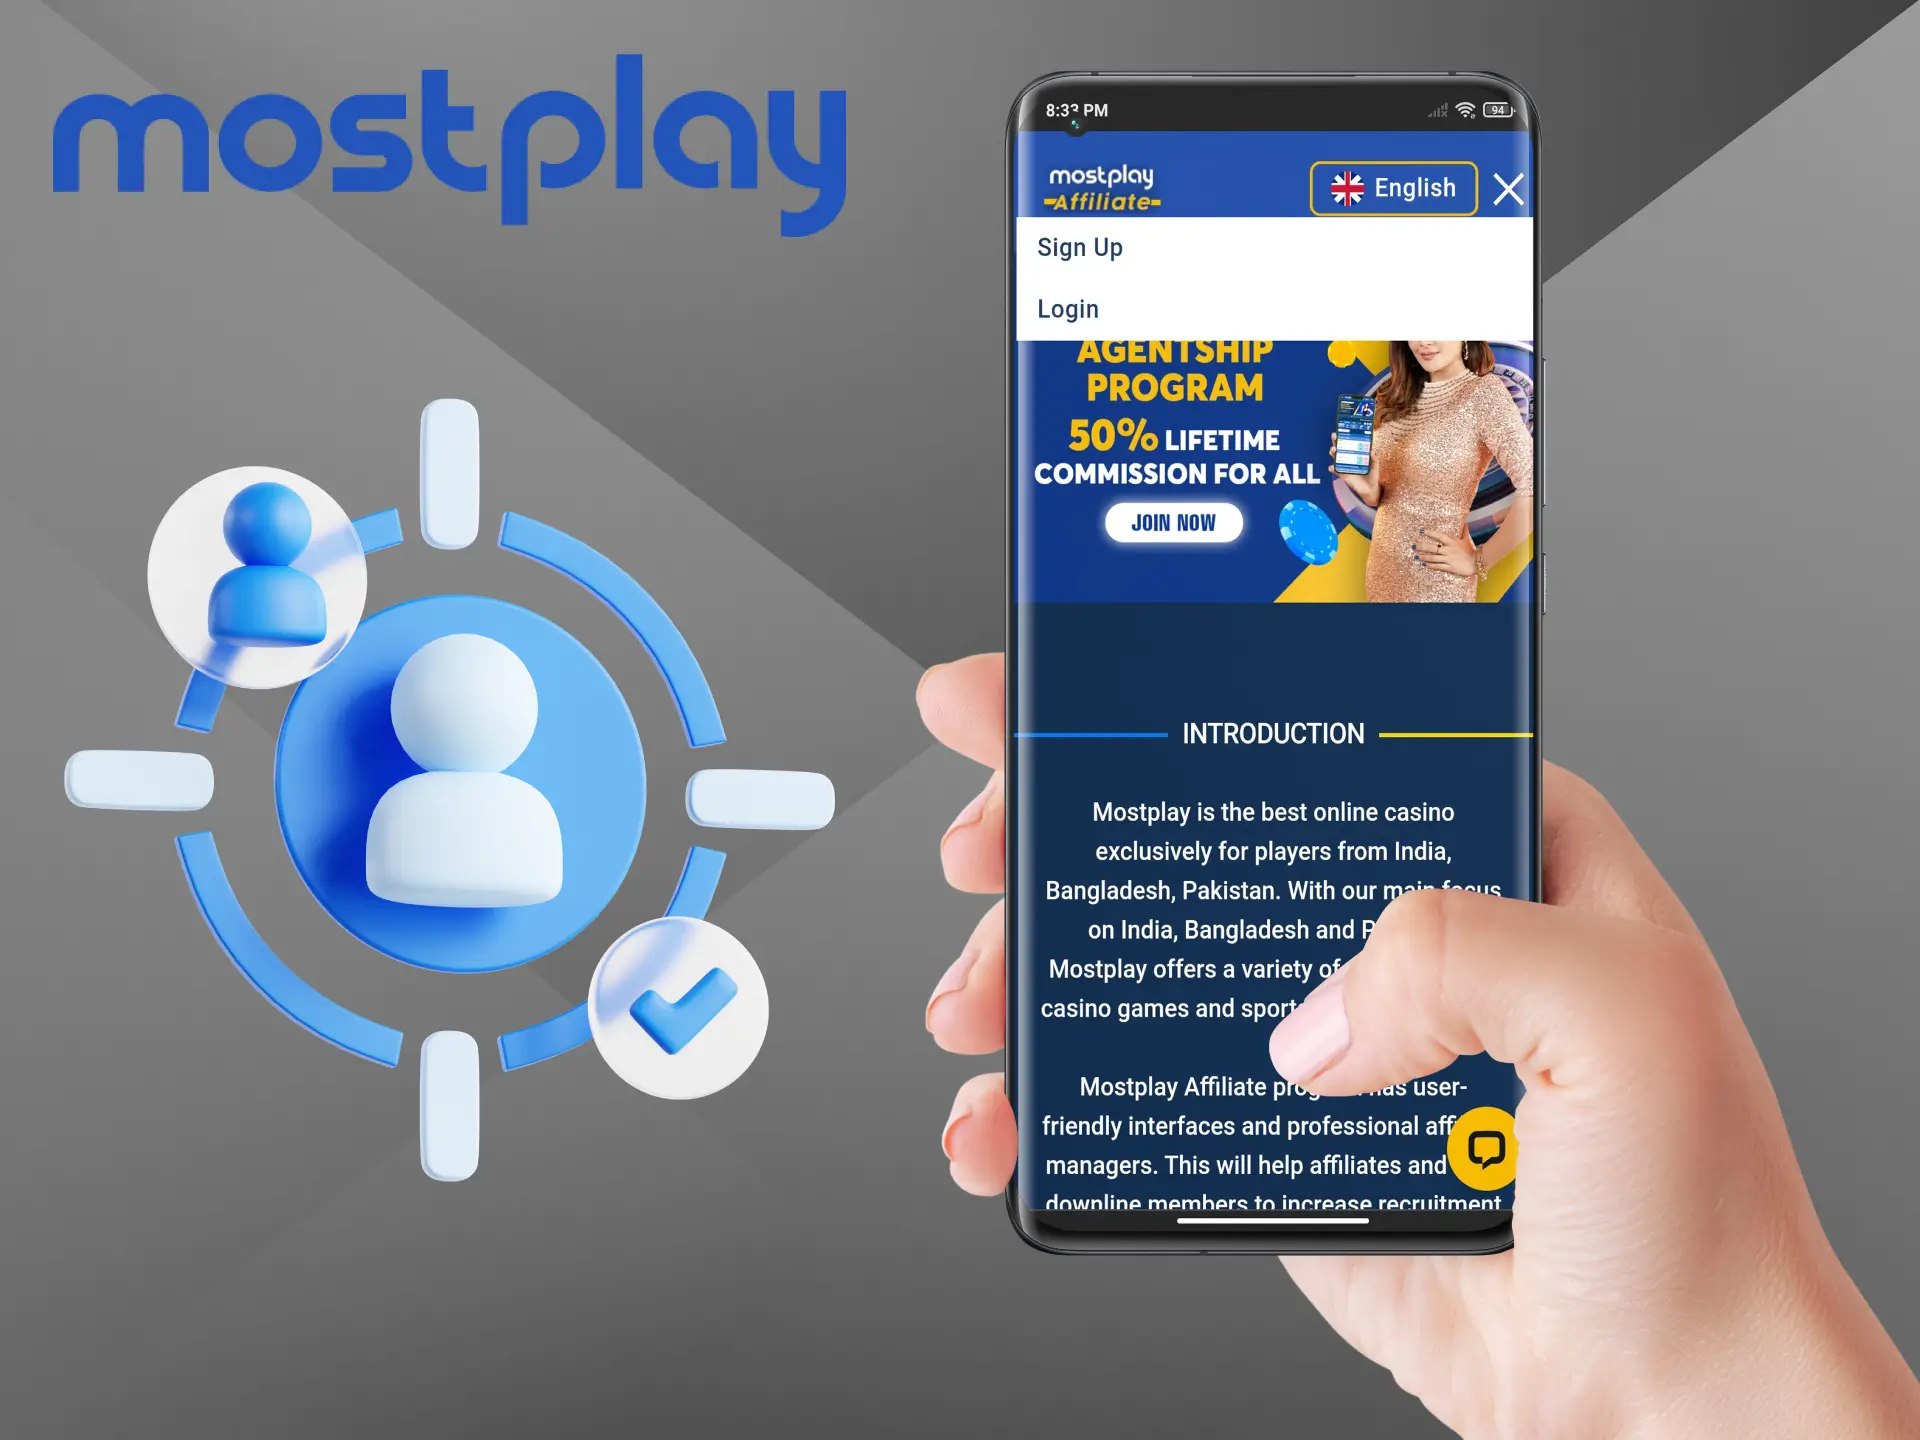 Use the Mostplay affiliate programme to earn great money and work closely with the casino.